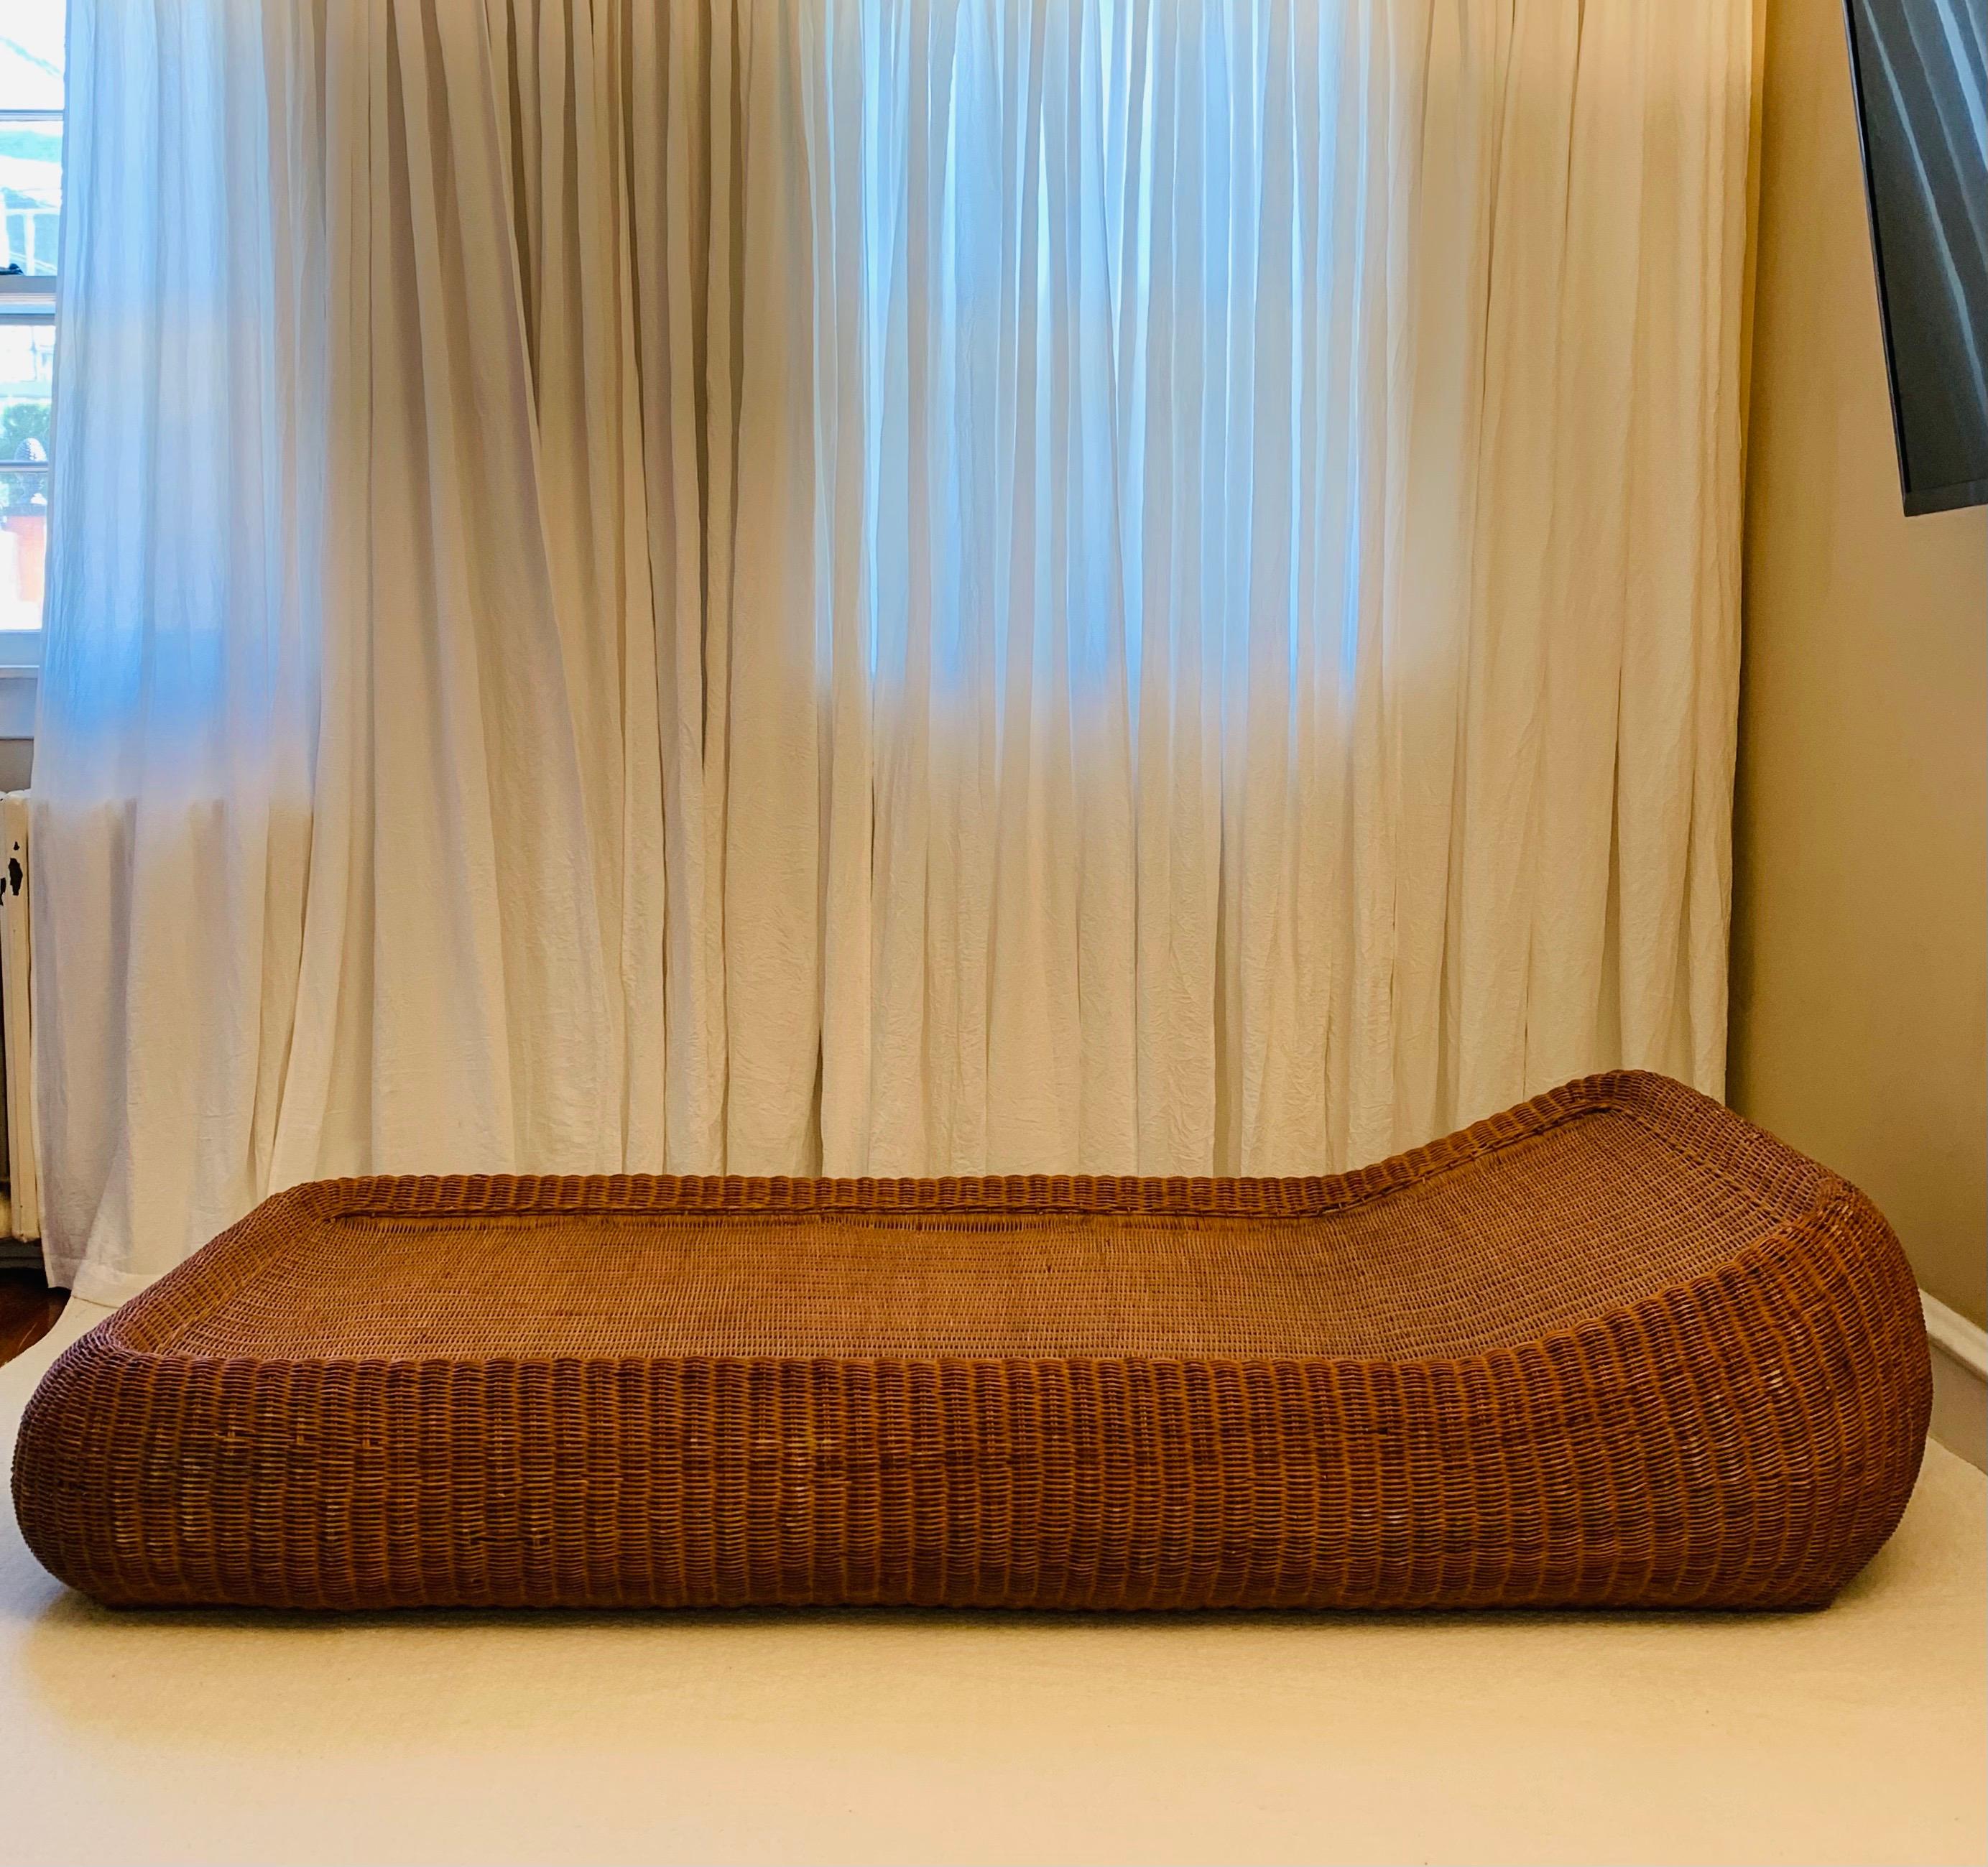 Wonderfully large statement chaise longue. 
This piece is in strong complete condition with no major holes or issues with the rattan.

The original natural hue of the rattan remains and is not stained or discolored, lest for a few small areas.